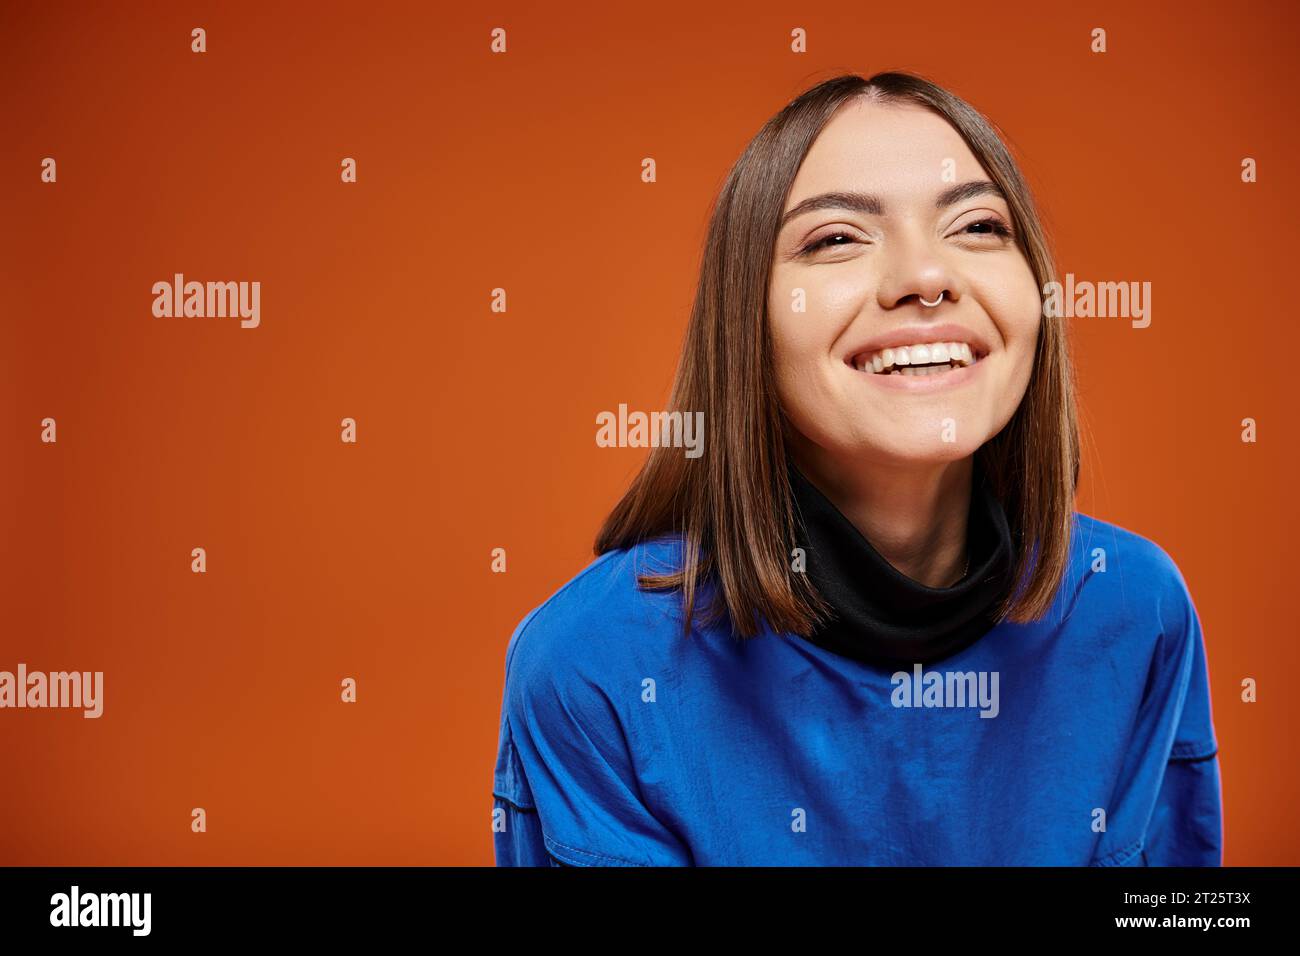 happy young woman with pierced nose looking away and smiling on orange backdrop, blue sweatshirt Stock Photo